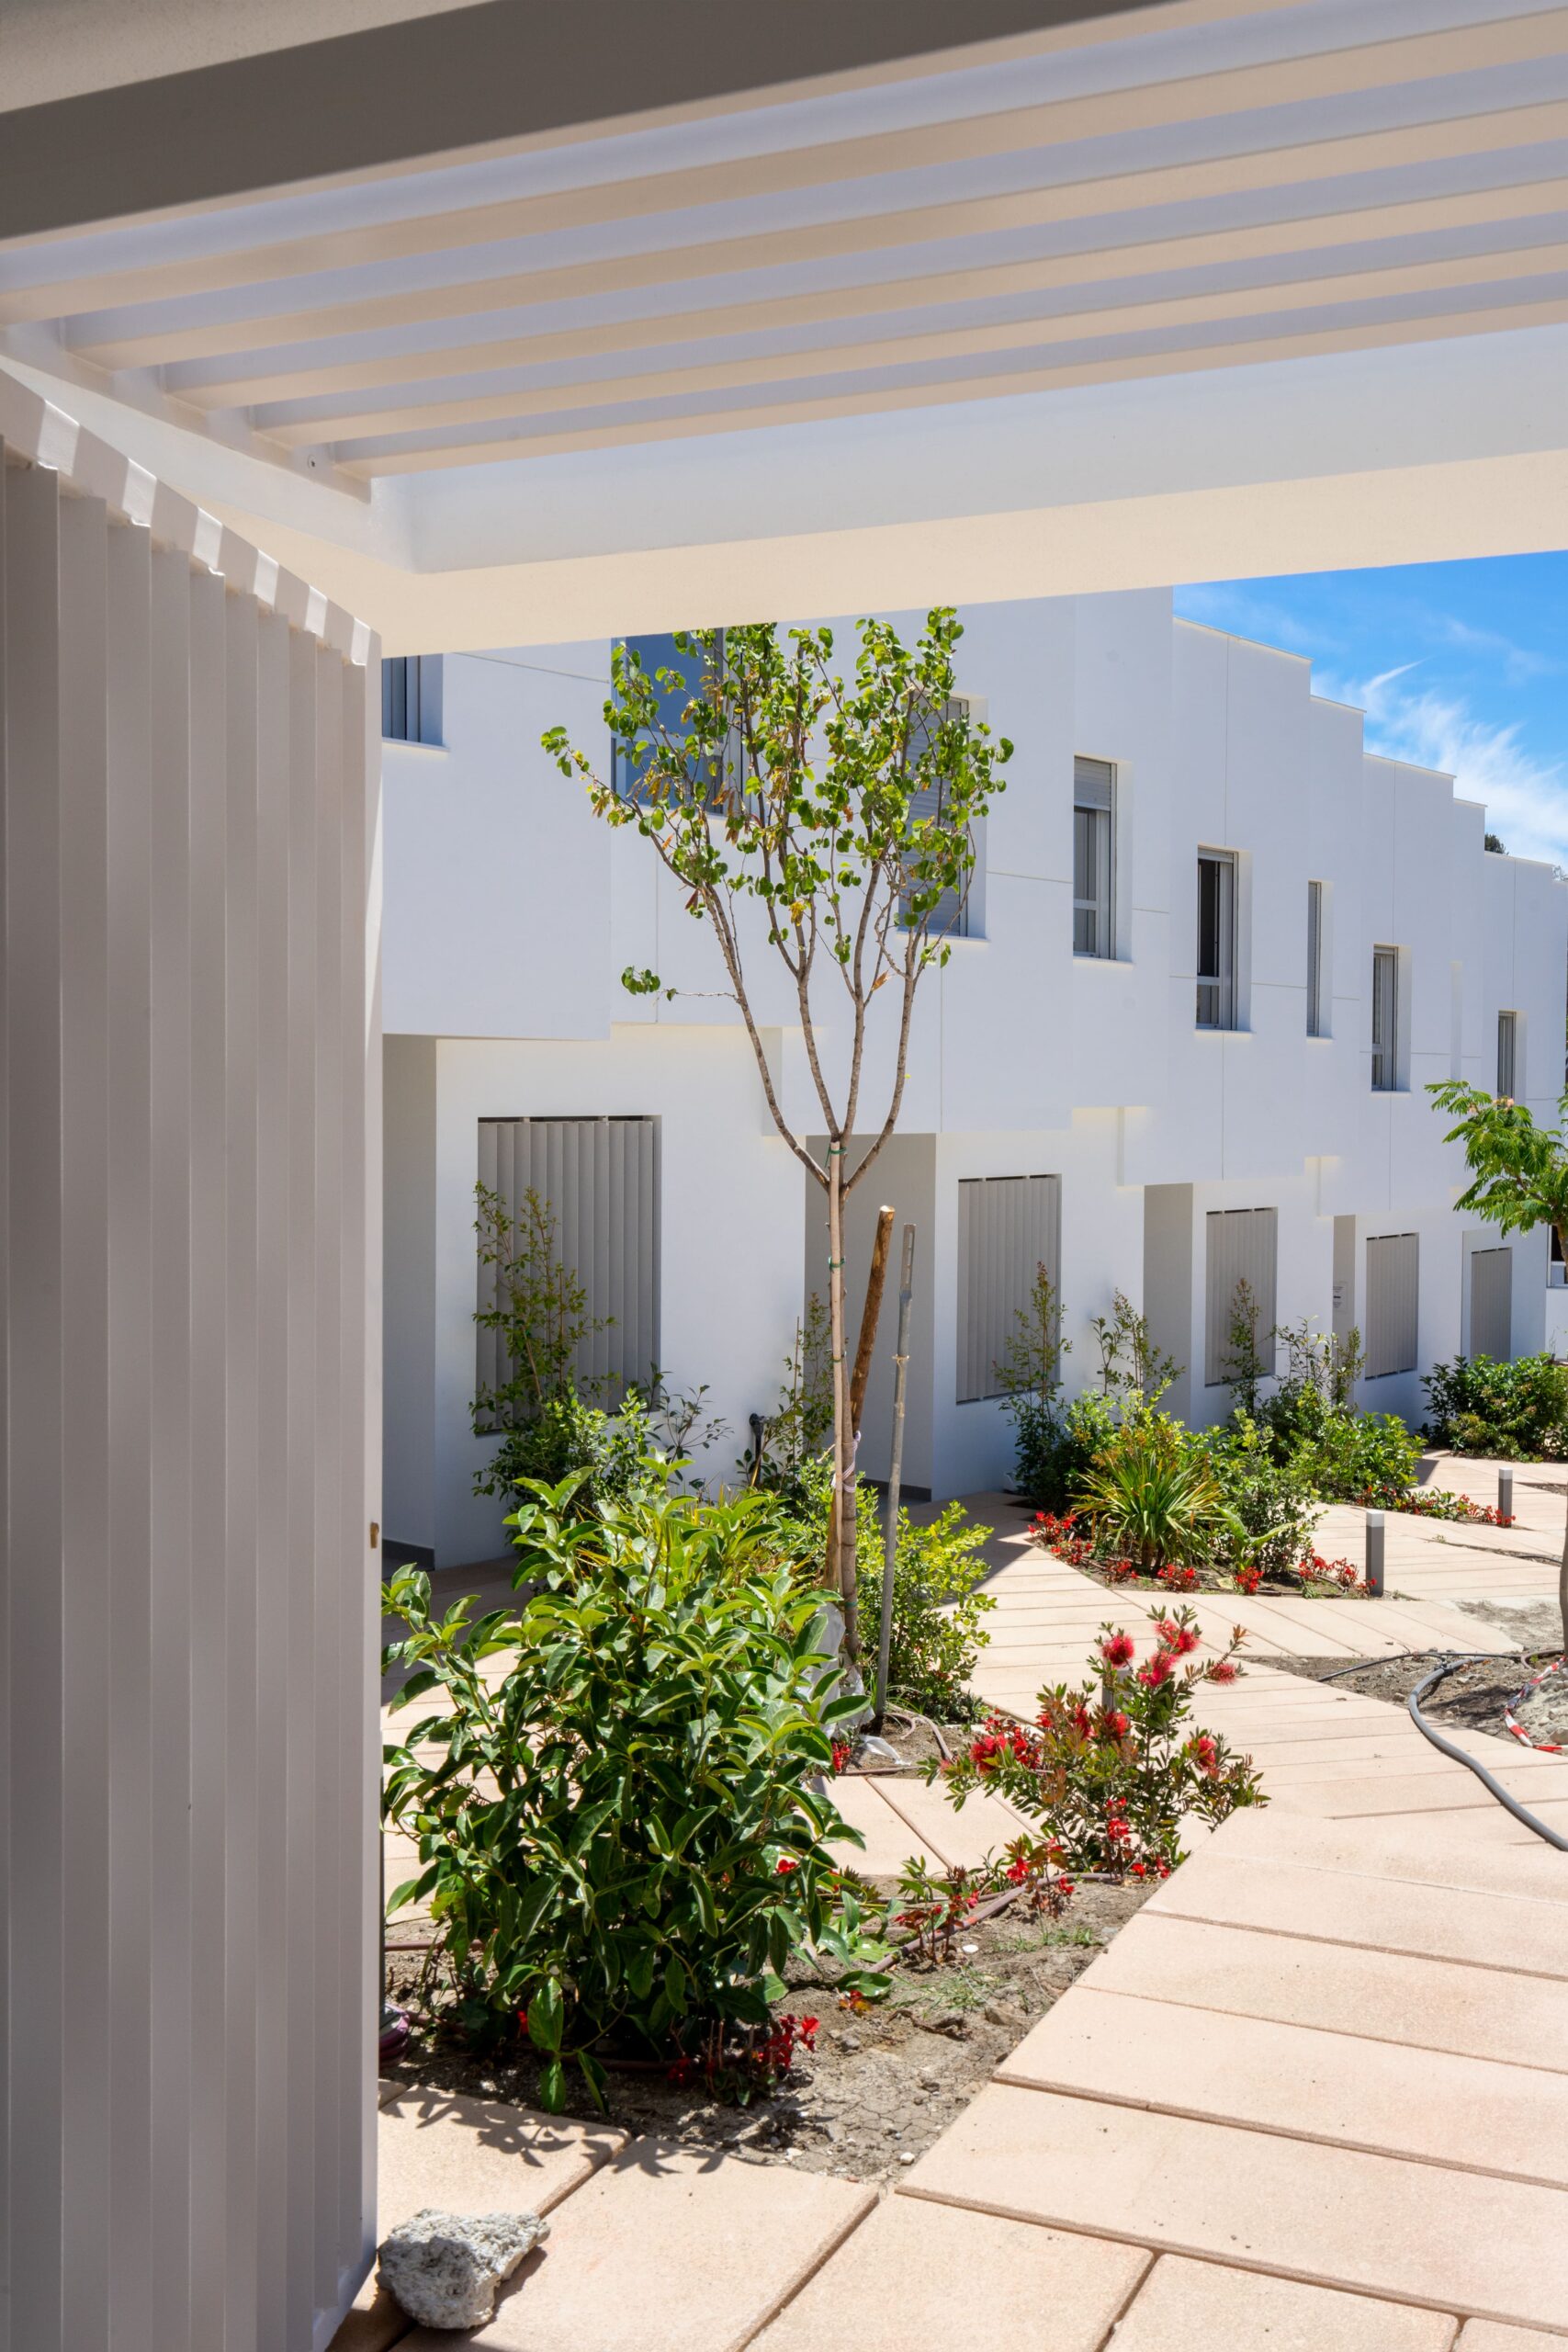 Green Golf Townhouse - Estepona real state